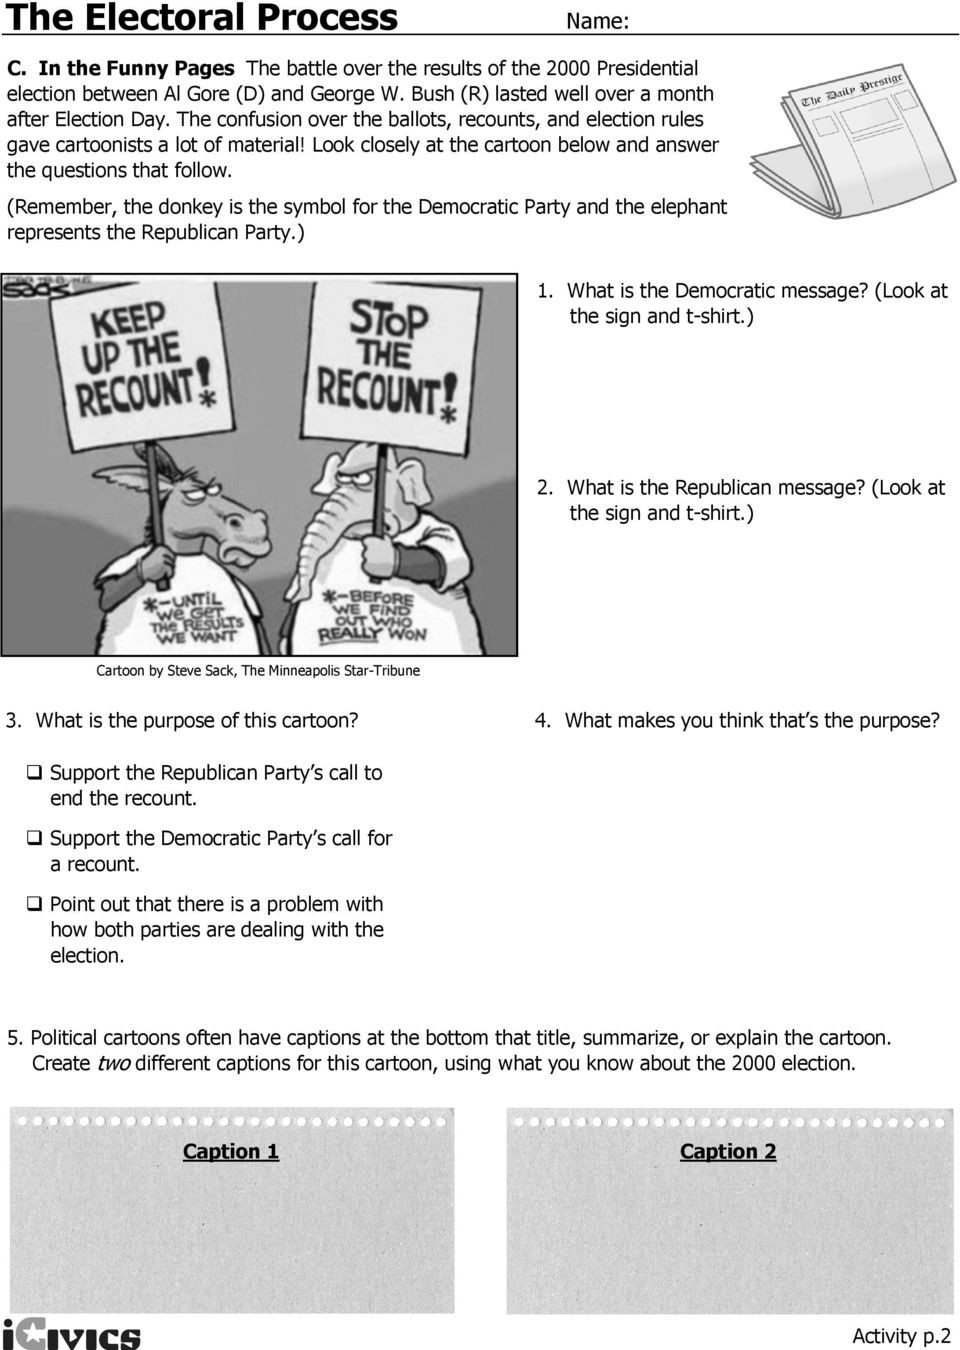 The Electoral Process Worksheet the Electoral Process Step by Step the Worksheet Activity